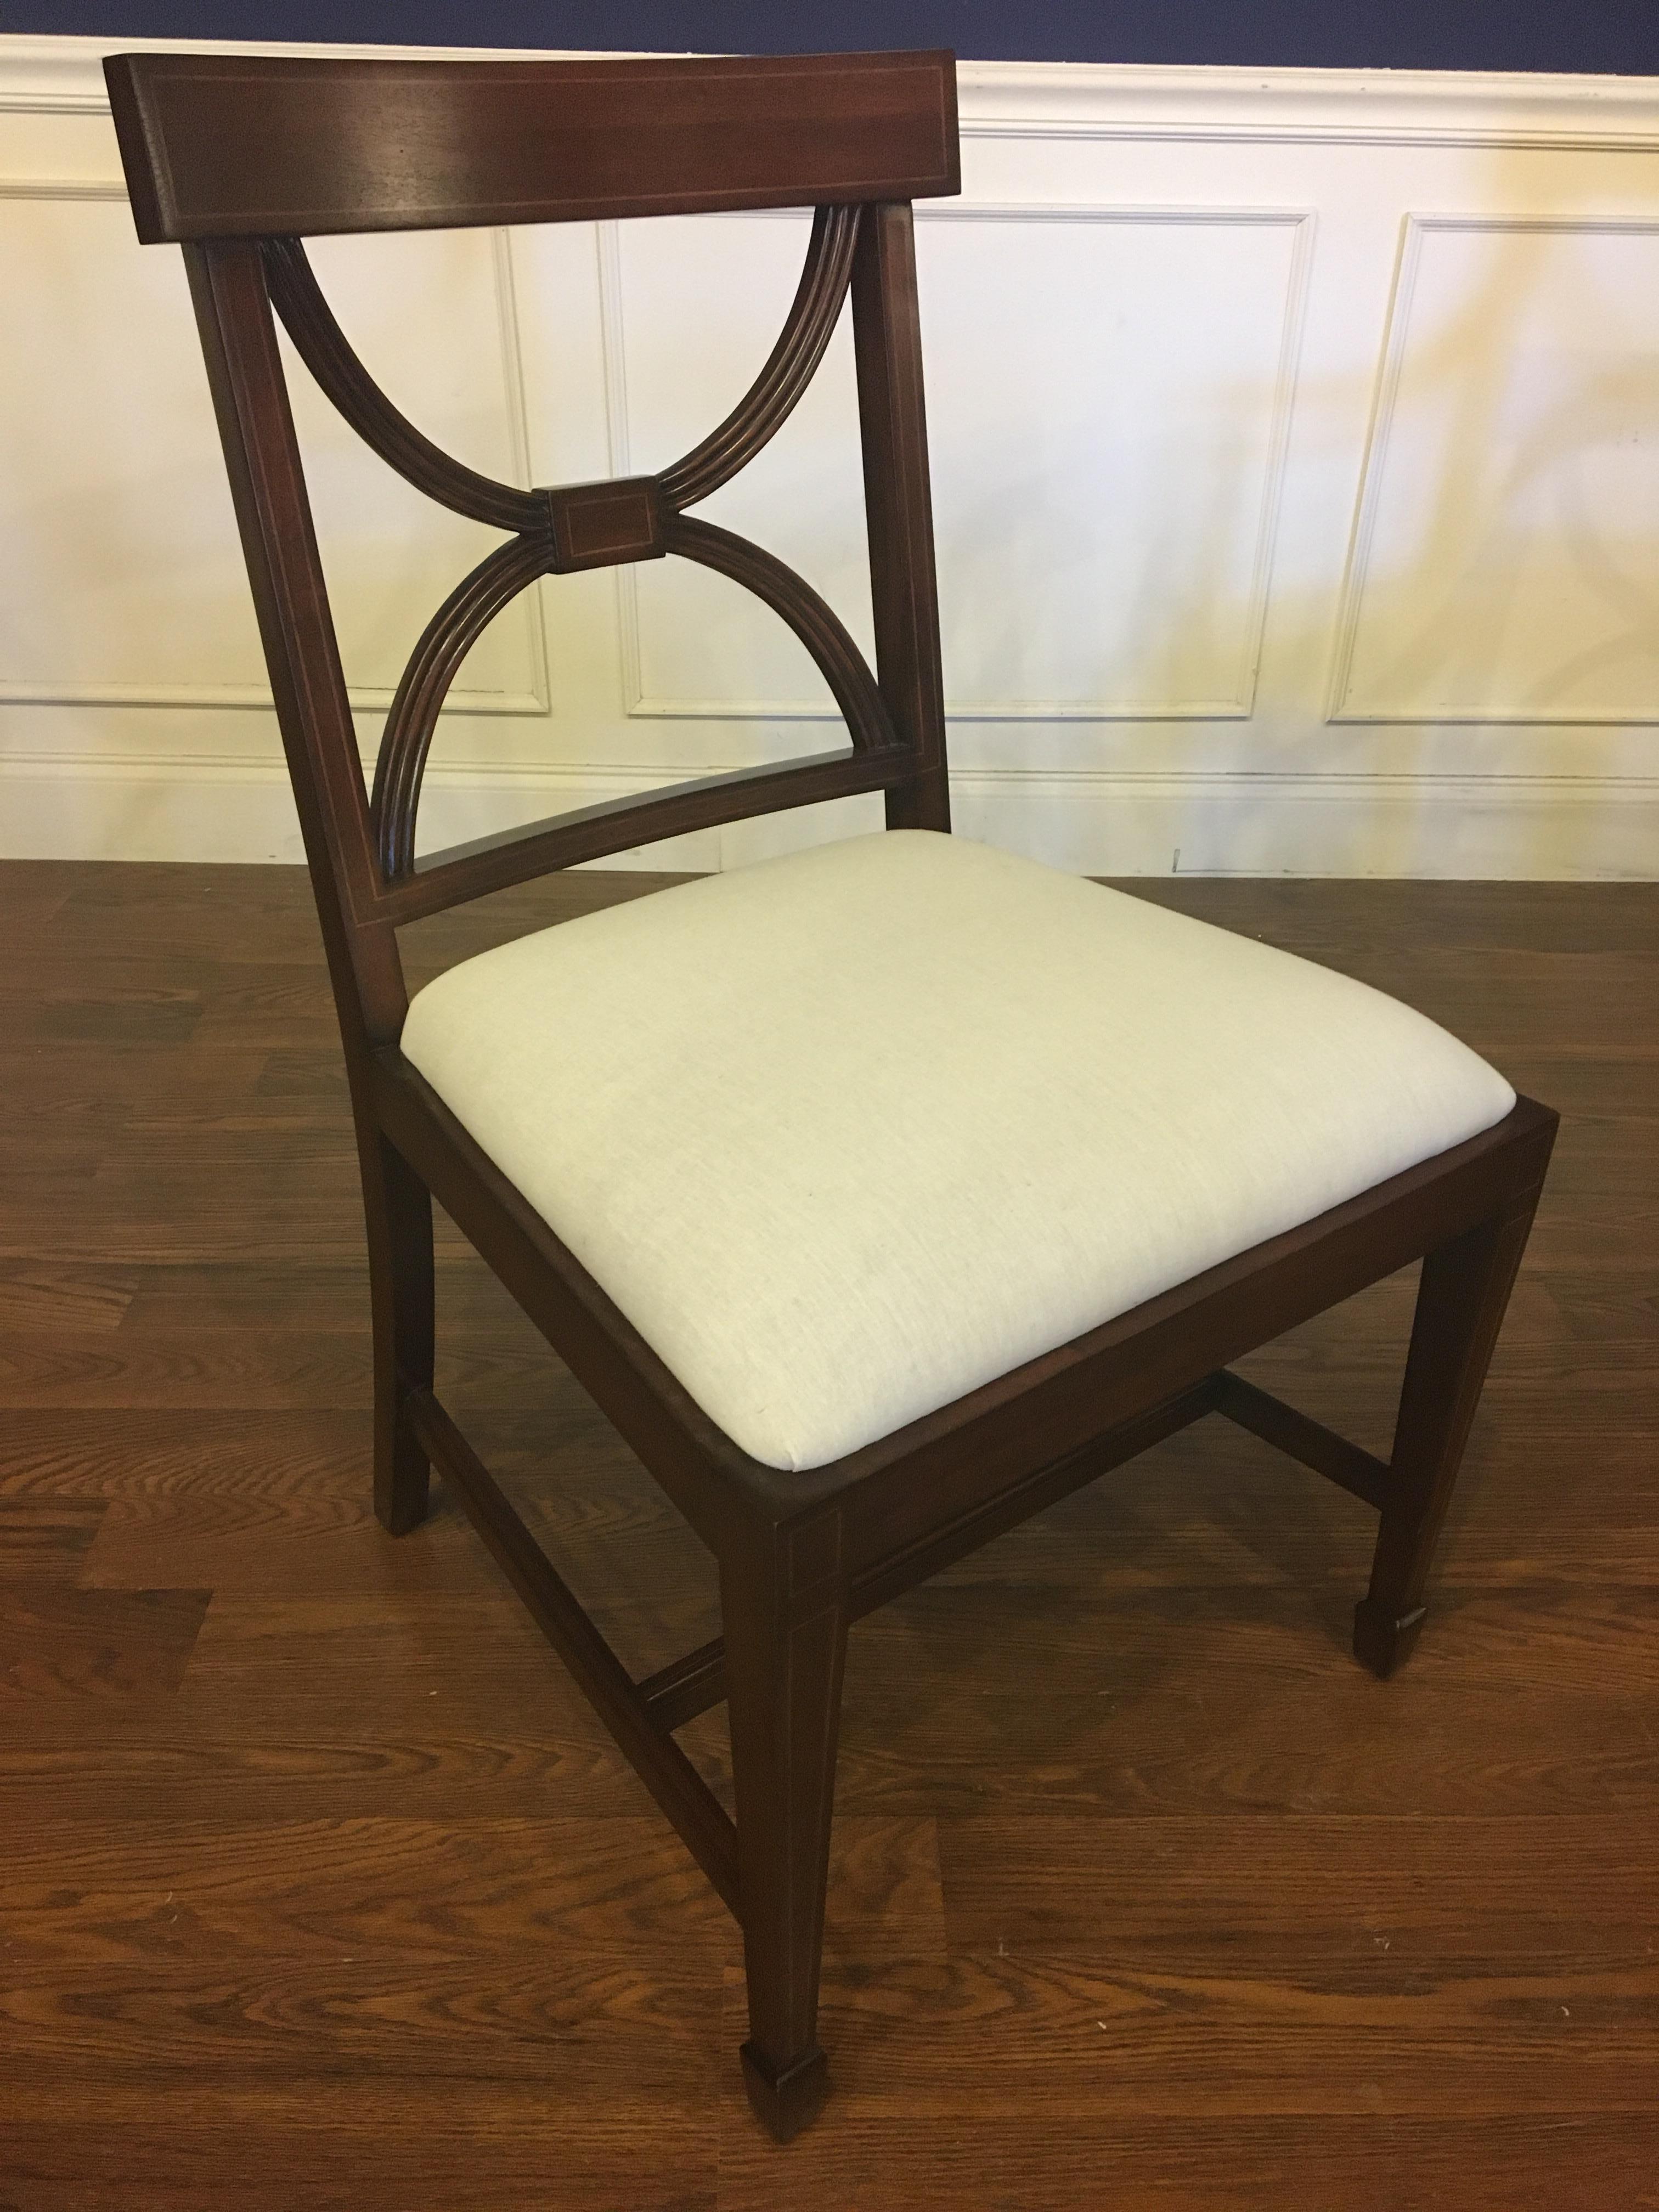 Eight New Traditional Mahogany Adams Style Inlaid Dining Chairs by Leighton Hall 1